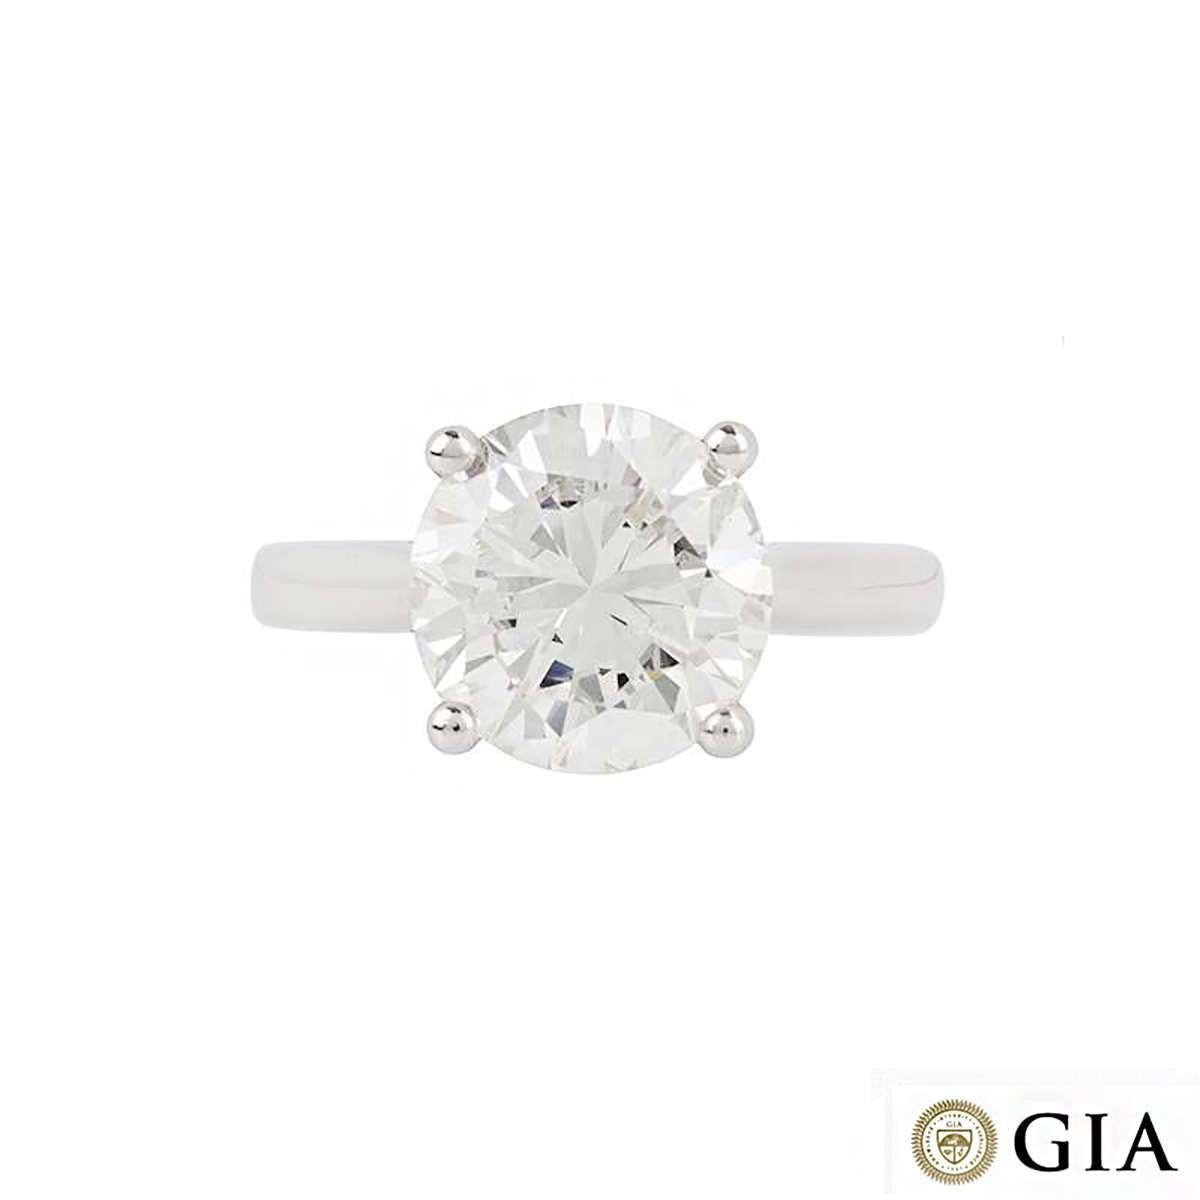 An exquisite diamond single stone ring in platinum. The 3.93ct round brilliant cut diamond is set in a timeless four claw setting, the colour is H and the clarity is VS1. The 3mm tapered ring is currently a UK size M, US size 6, but can be adjusted